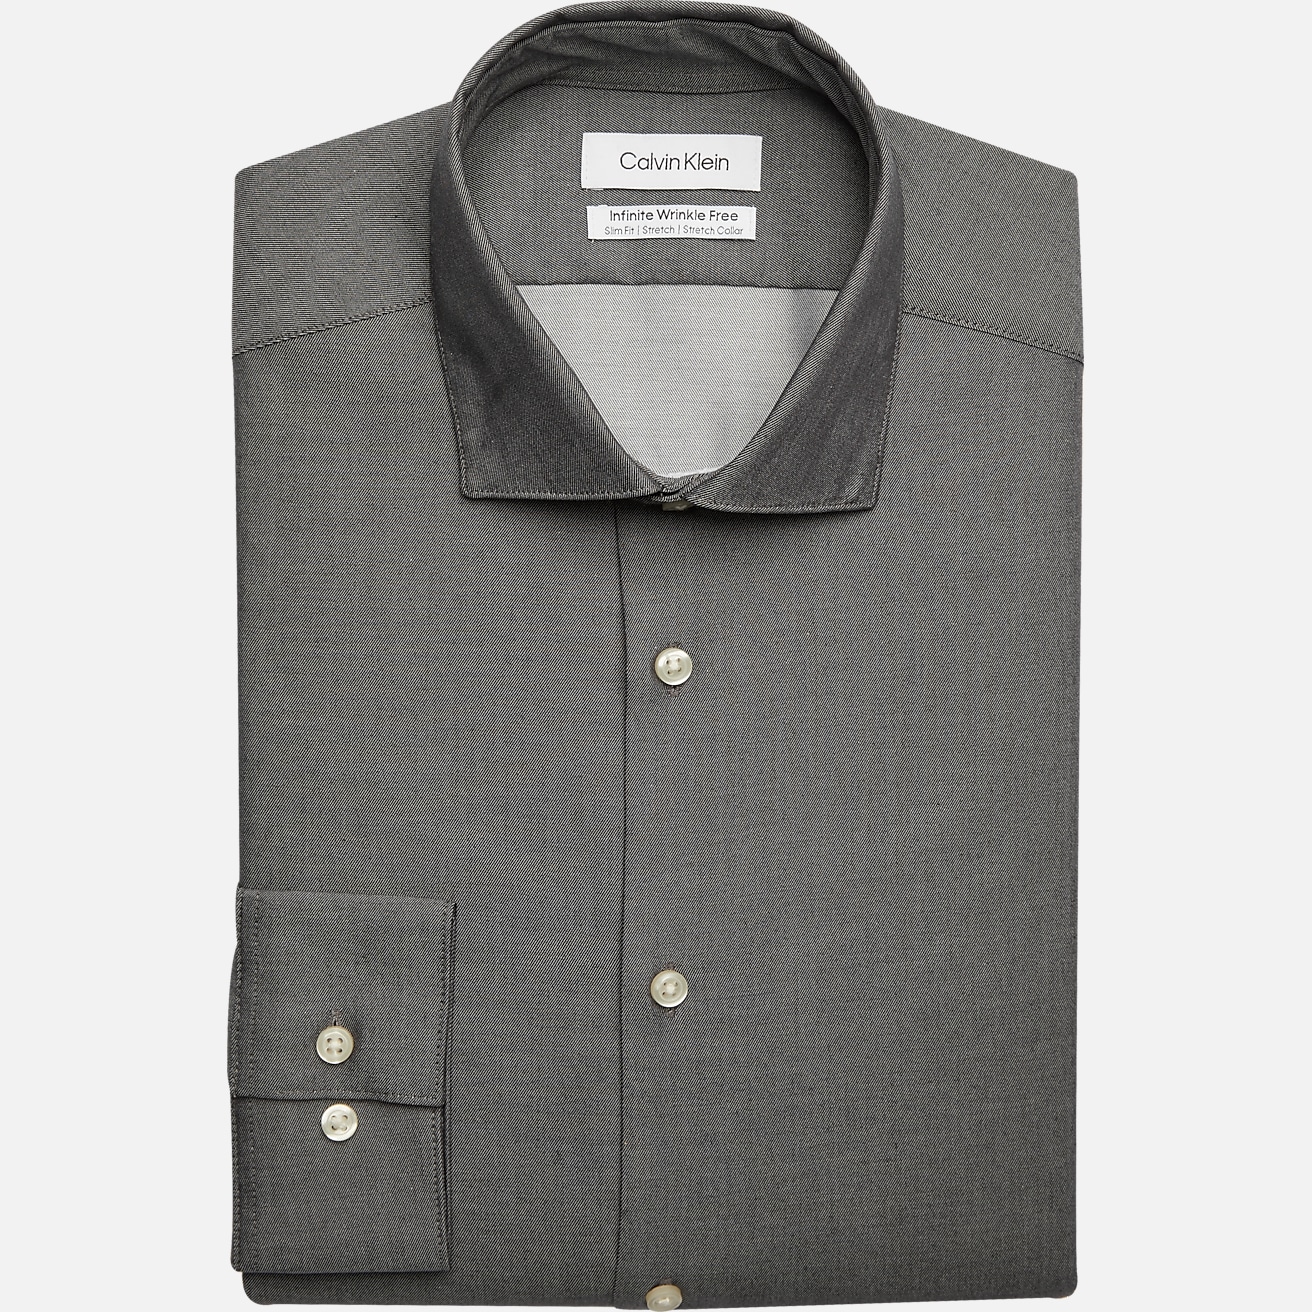 Calvin Klein Skinny Fit Spread Collar Dress Shirt | Men's Shirts | Moores  Clothing